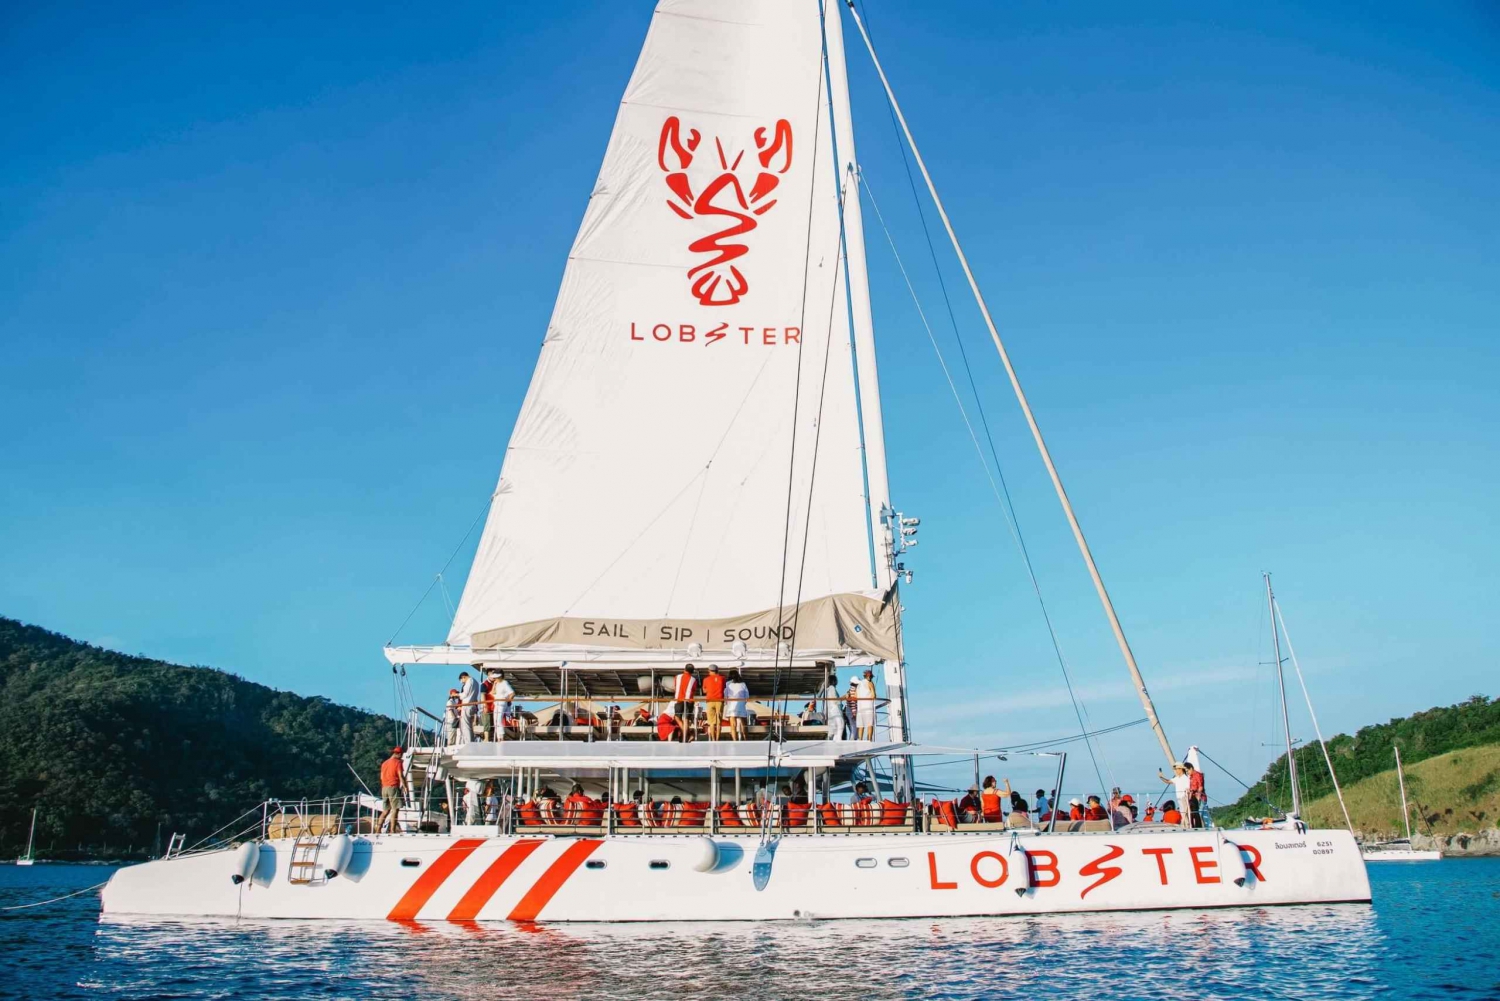 Join-in Lobster Day Phuket Yacht Experience